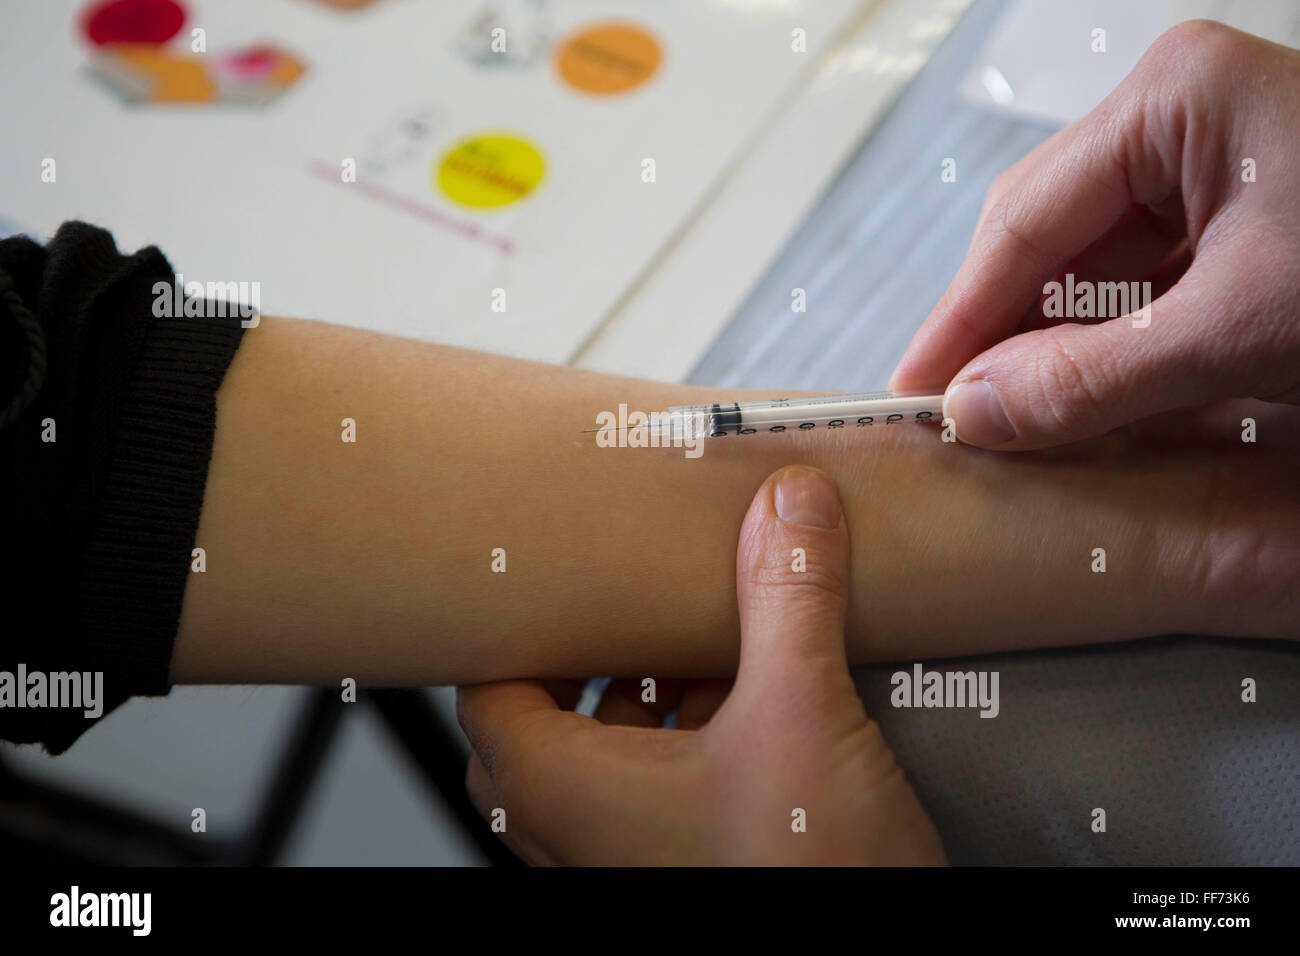 Sarah Murphy, TB Nurse Specialist, performs an intra-dermal injection of the Mantoux PPD skin test on a young person’s forearm to screen for Latent TB infection. London, UK. Stock Photo